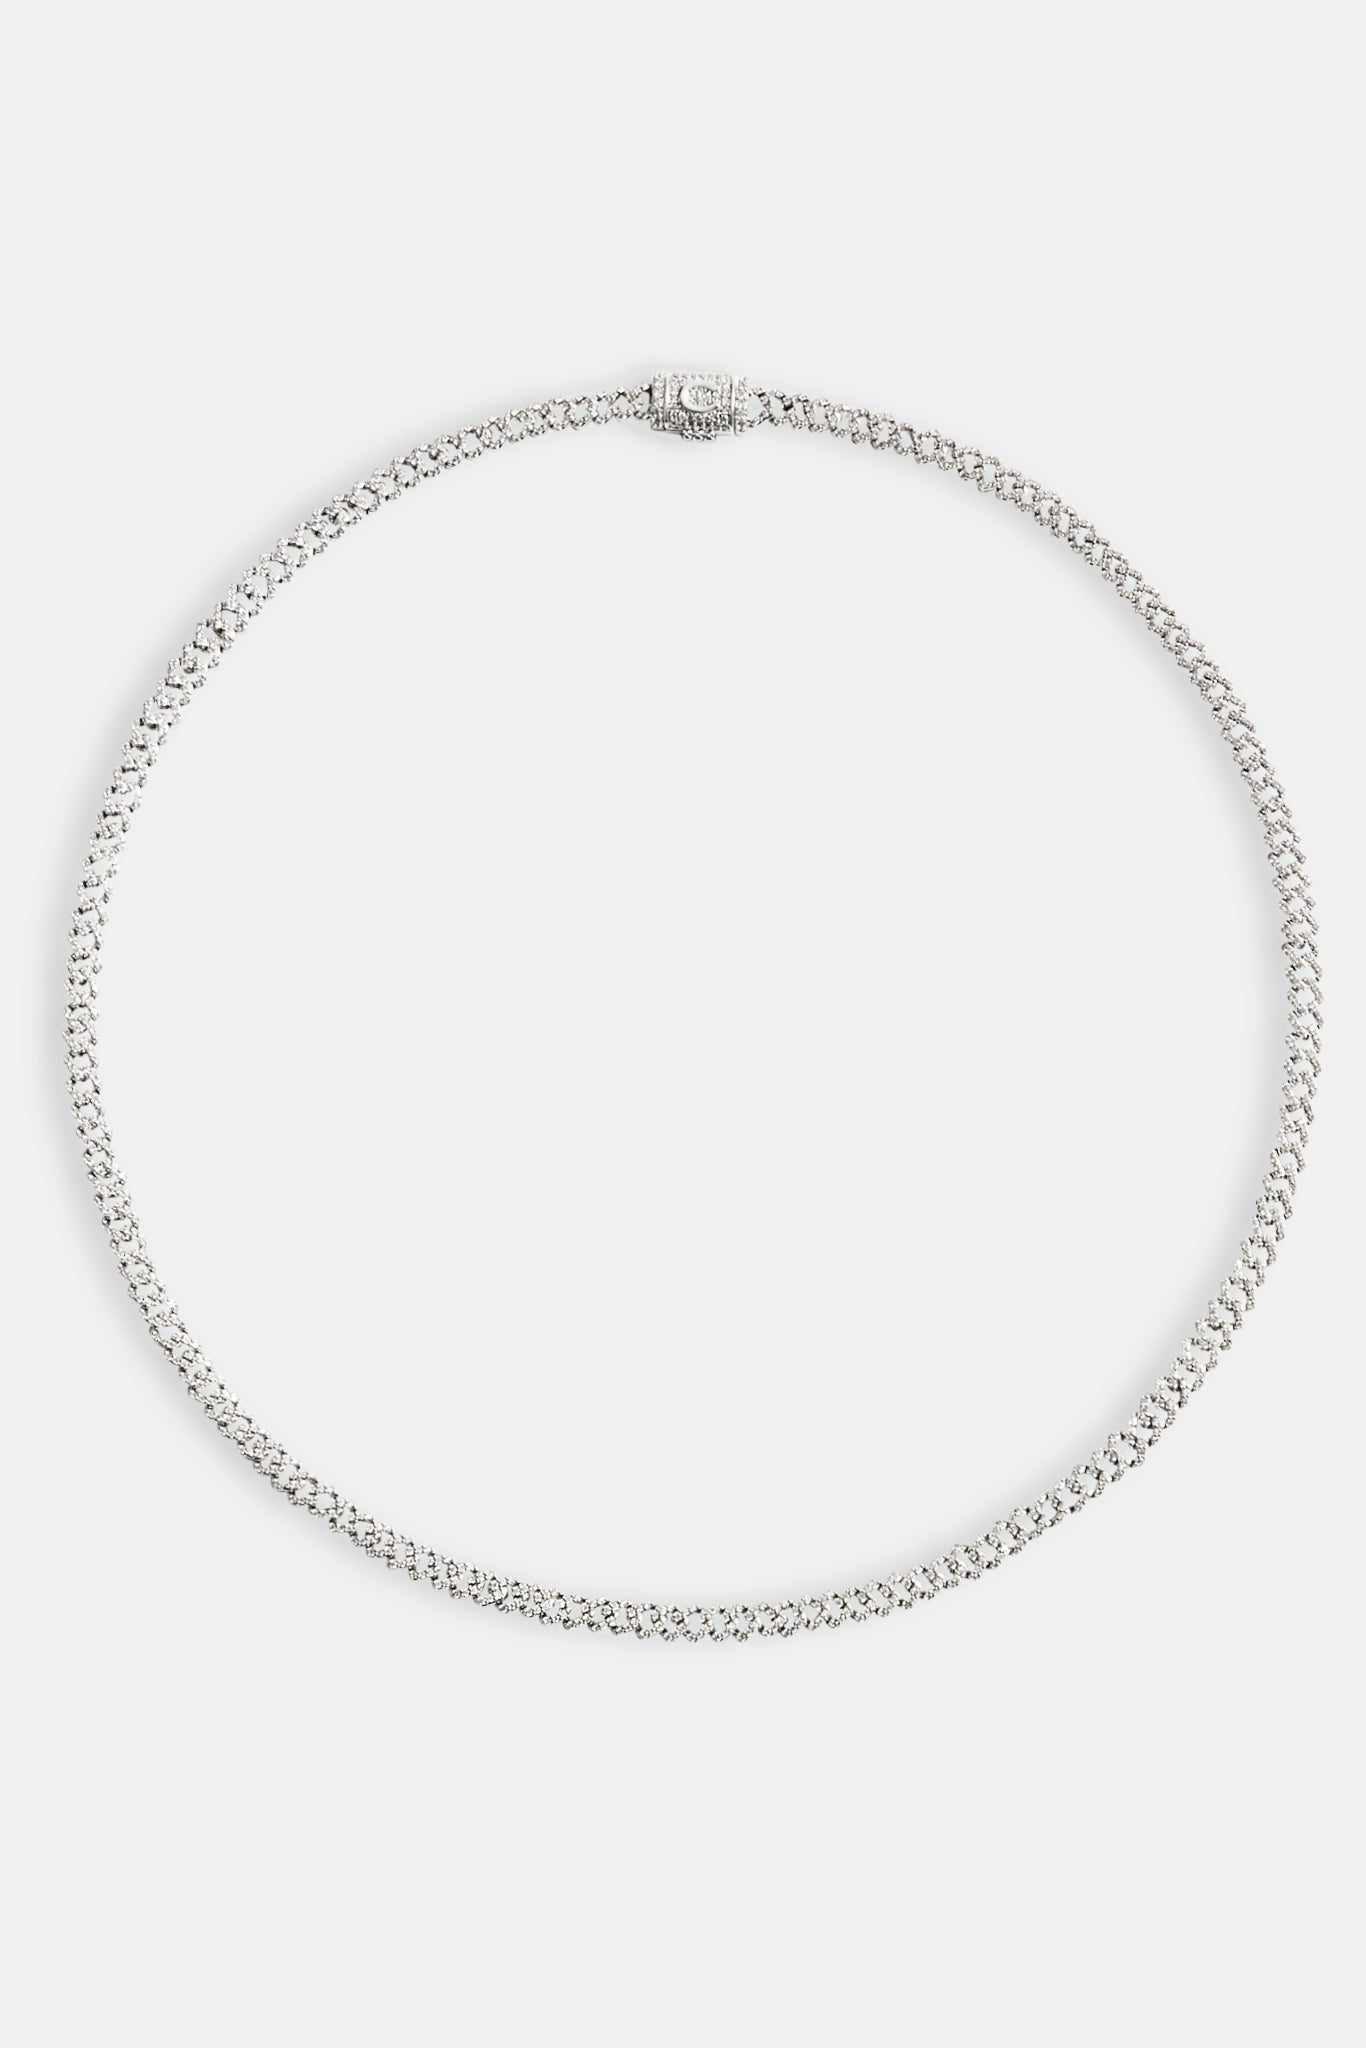 5mm Iced Prong Chain – Cernucci